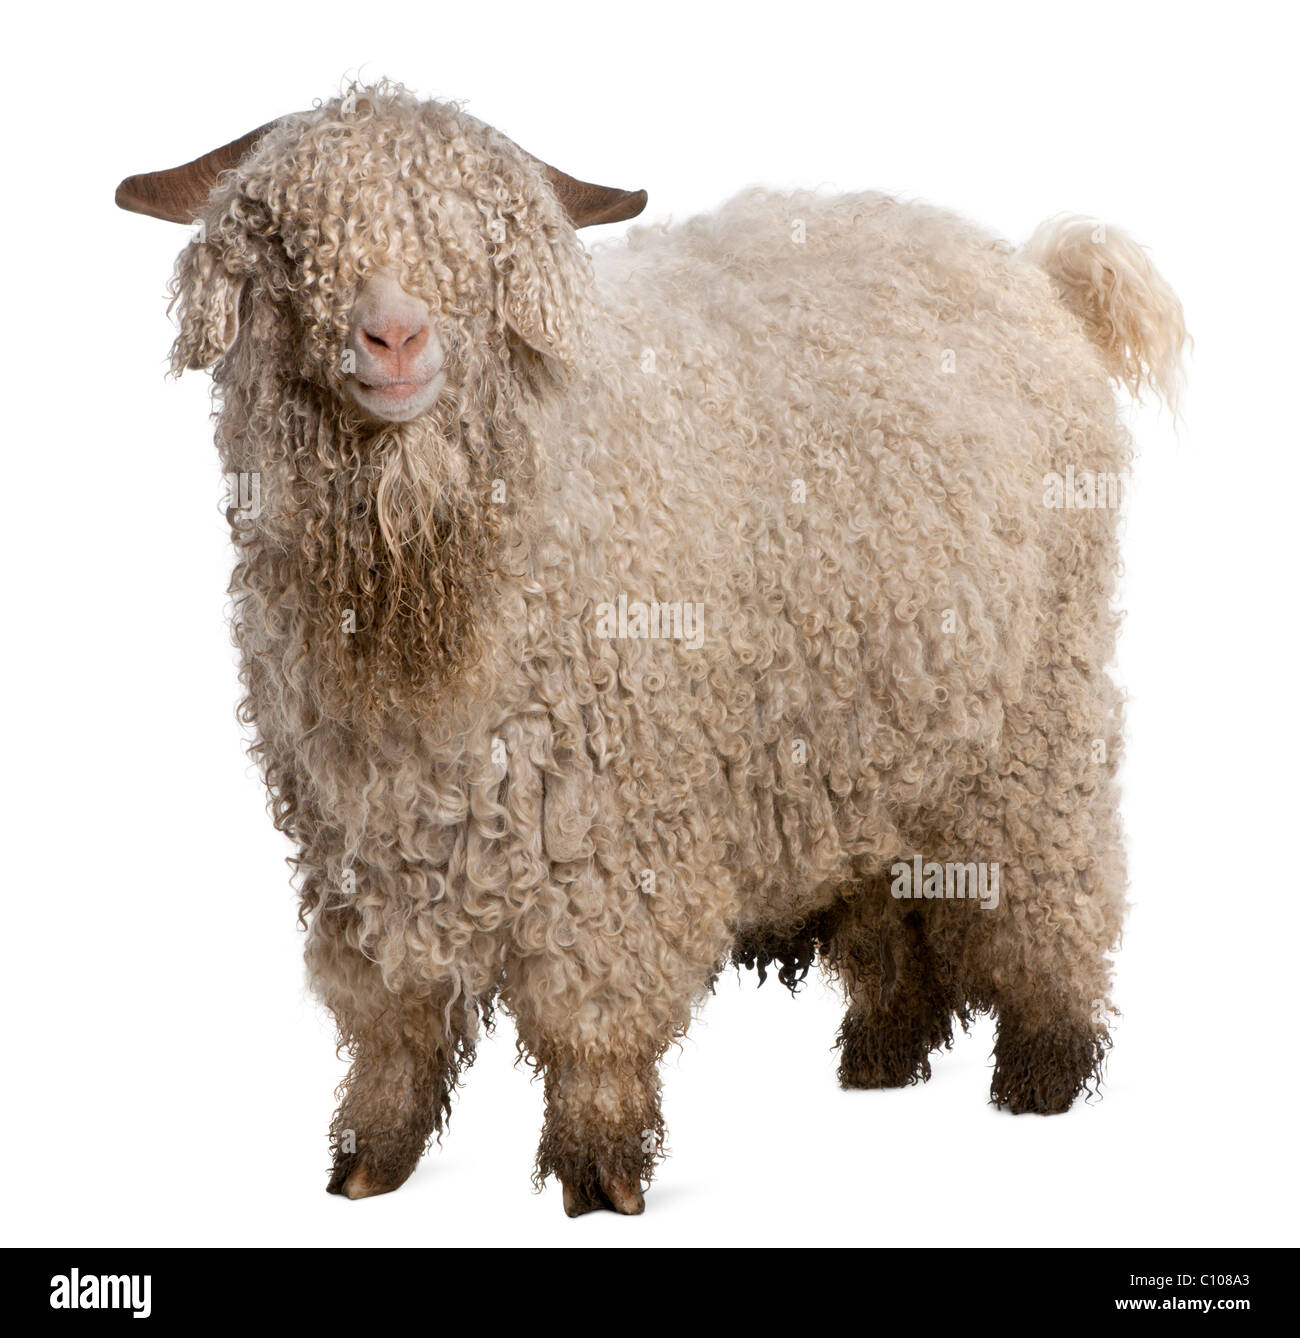 Angora goat in front of white background Stock Photo